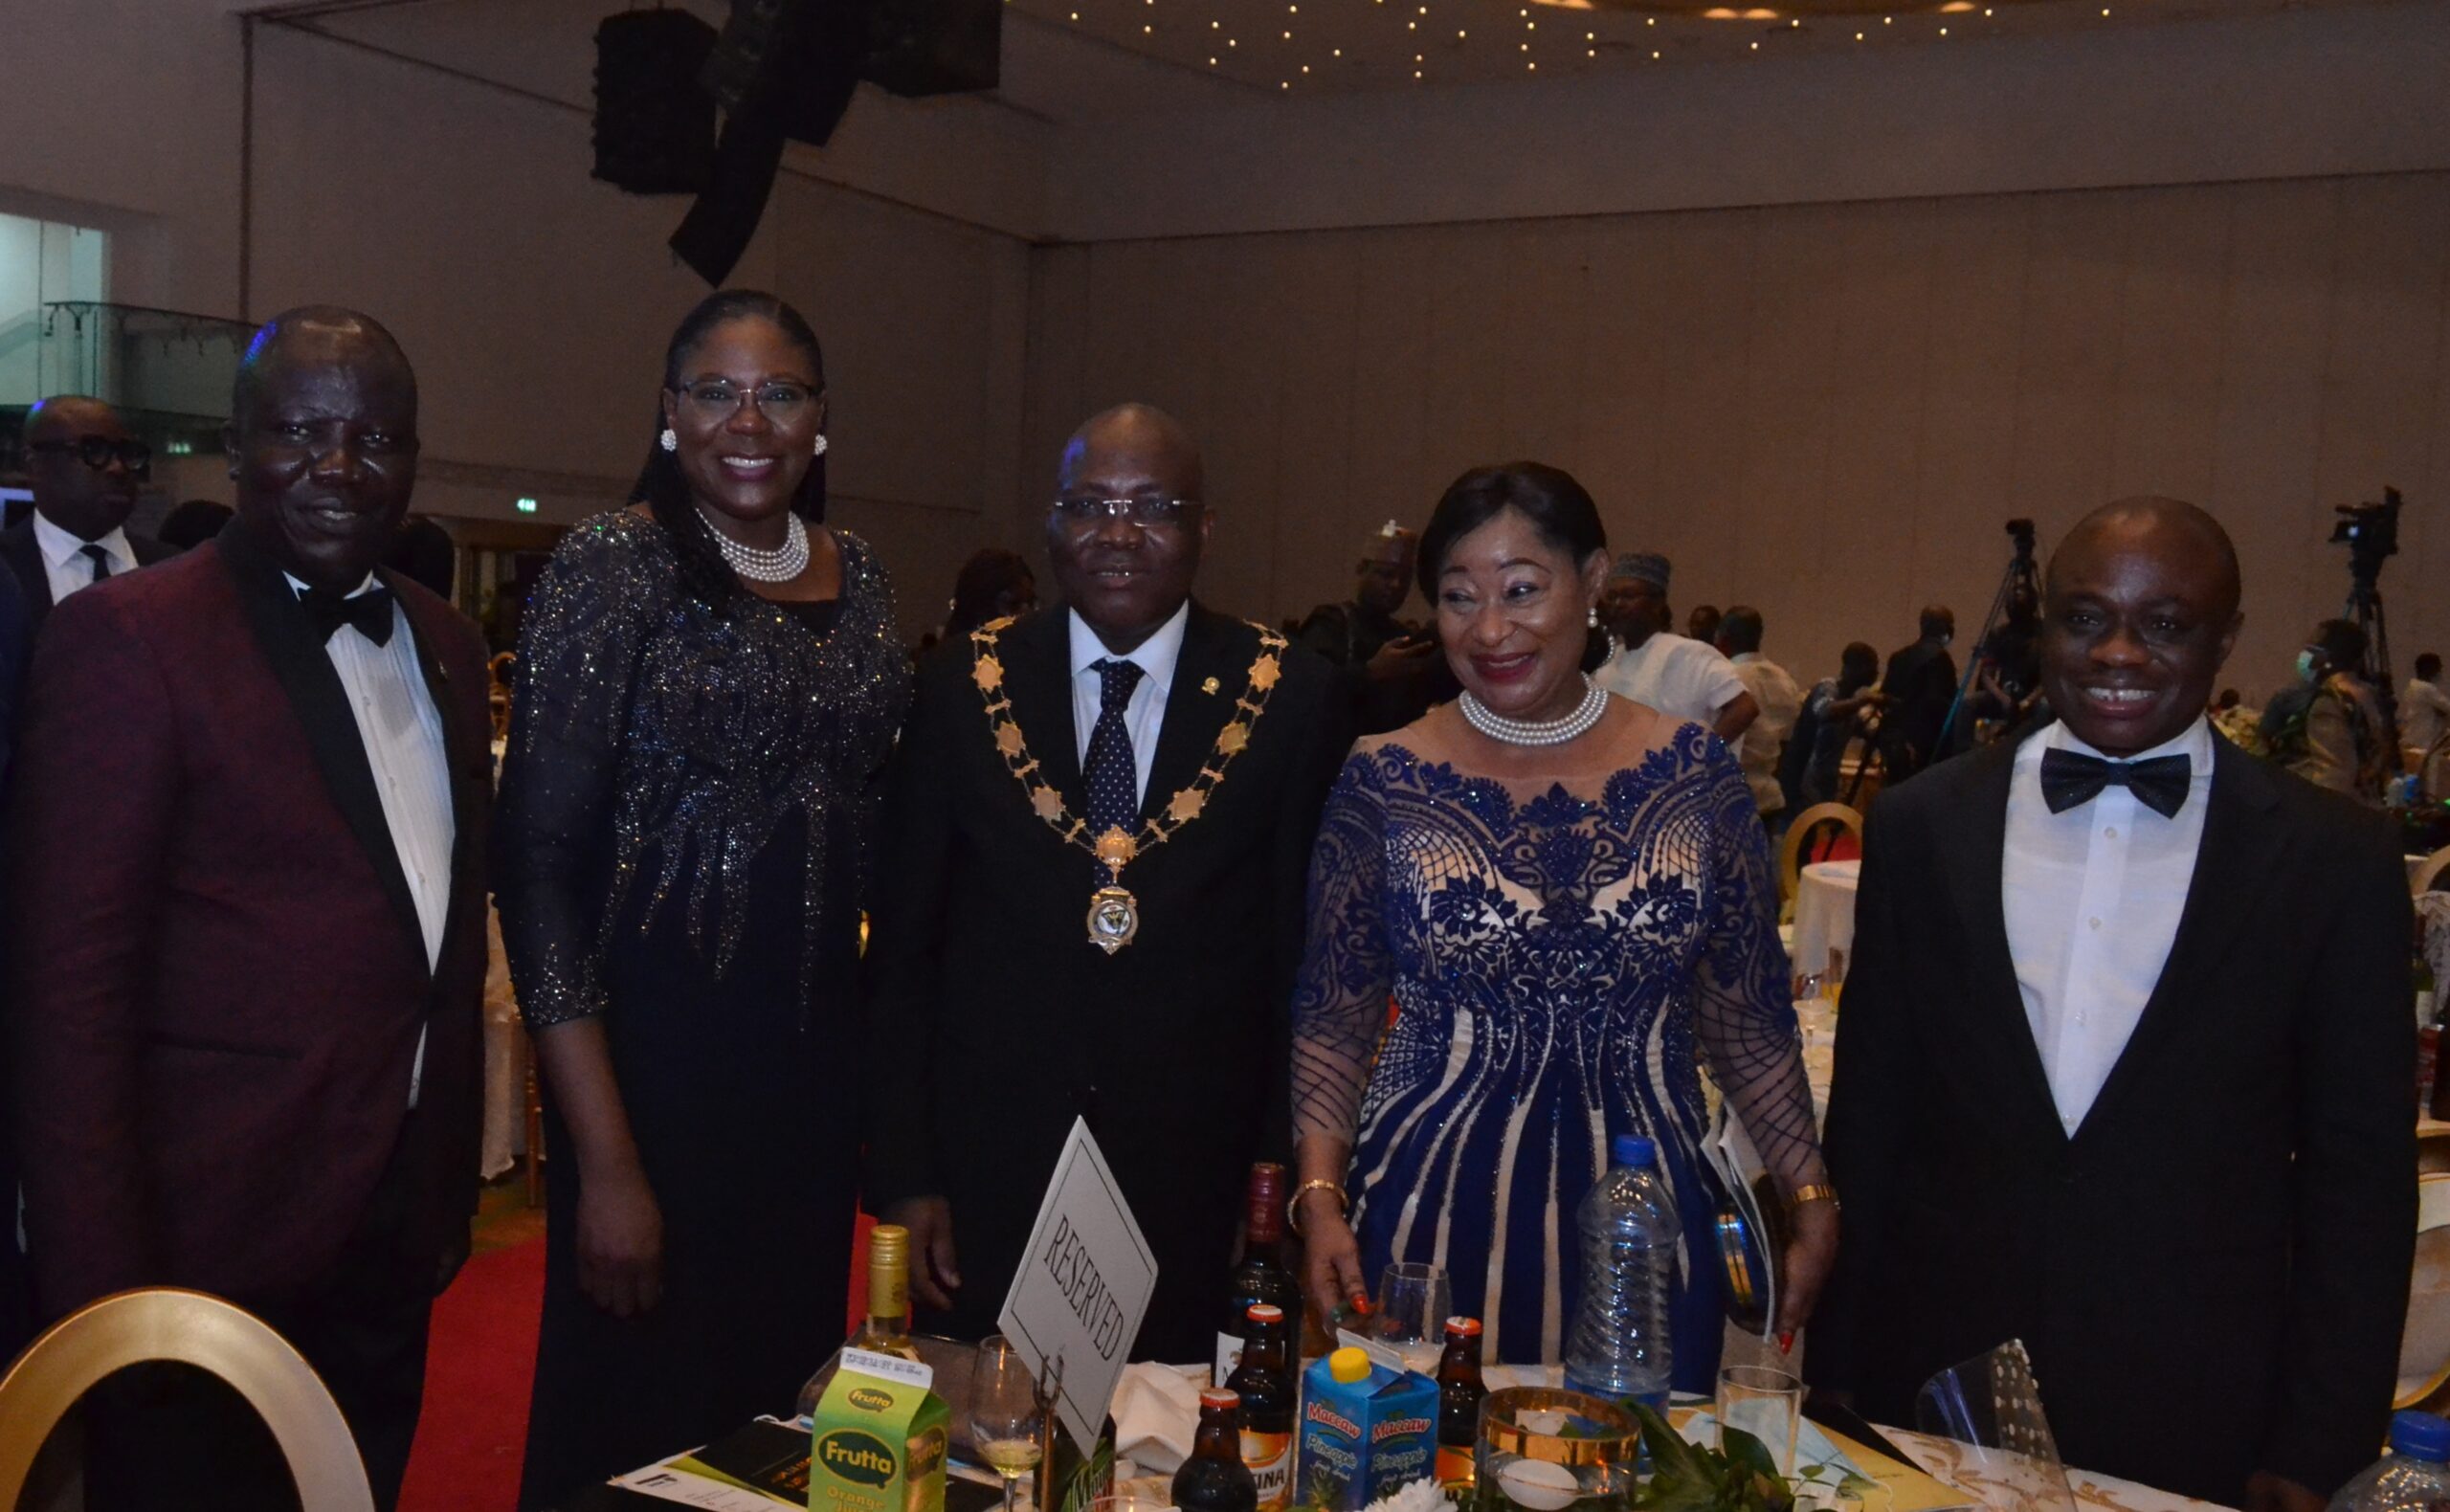 L-R: Mr. Seye Awojobi, Registrar/CEO, The Chartered Institute of Bankers of Nigeria; Mrs. Fadekemi Olugbemi, Wife of President, CIBN; Mr. Bayo Olugbemi, President/Chairman of Council, The Chartered Institute of Bankers of Nigeria; Mrs. Nike Akande, former President, Lagos Chamber of Commerce and Industry and Dr Ken Opara, 1st Vice President, CIBN during the 55th Annual Bankers Dinner held yesterday at Eko Hotels & Suites, Victoria Island, Lagos